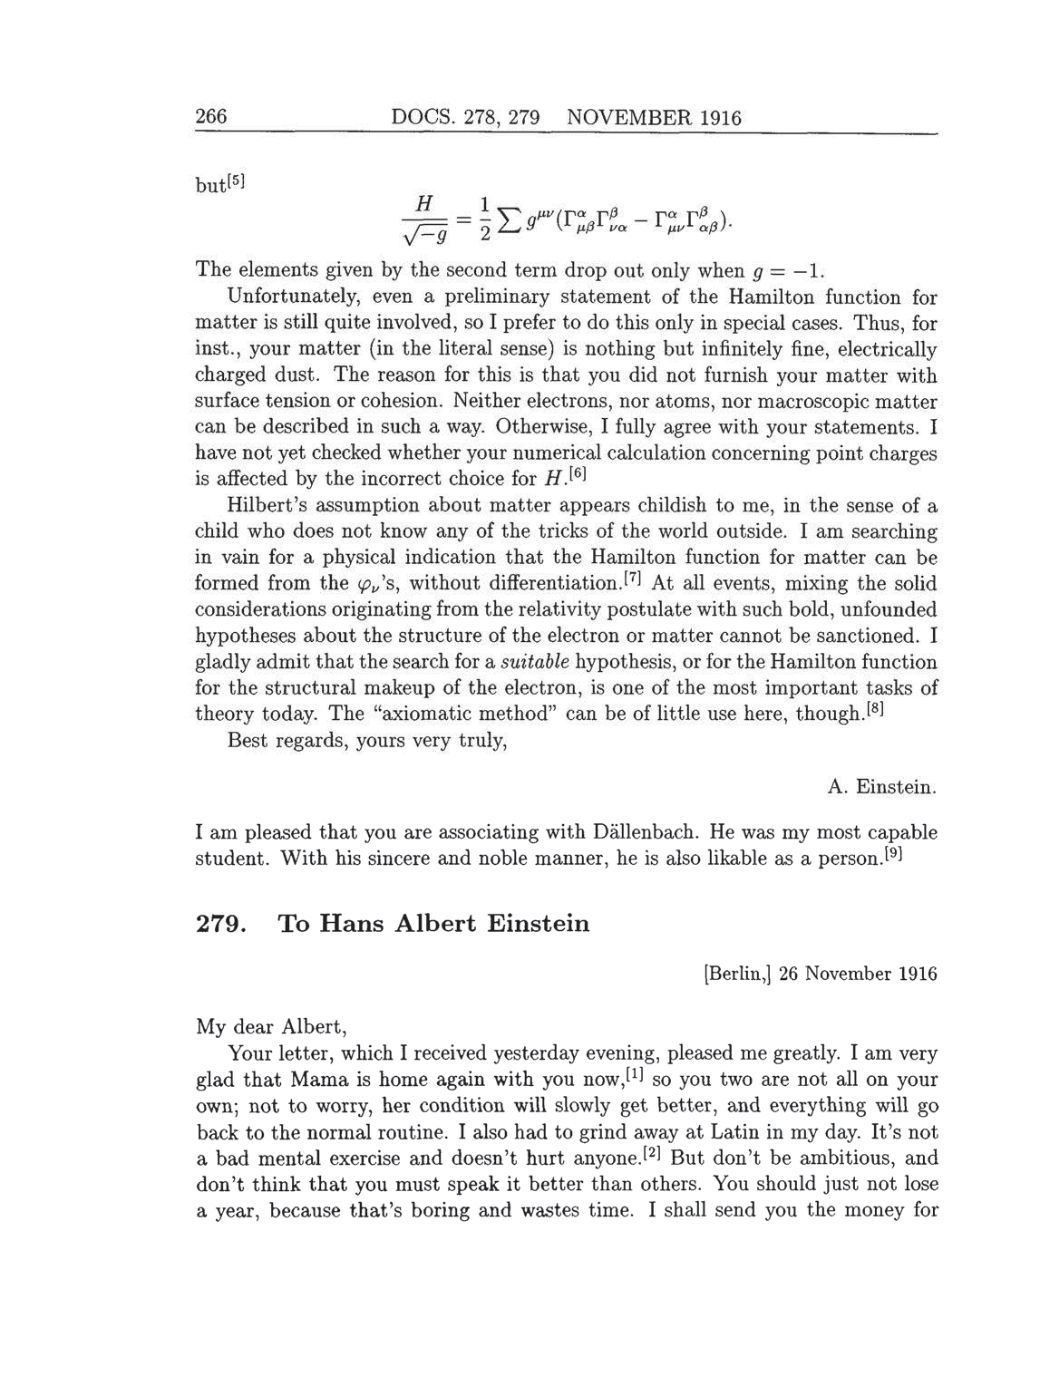 Volume 8: The Berlin Years: Correspondence, 1914-1918 (English translation supplement) page 266